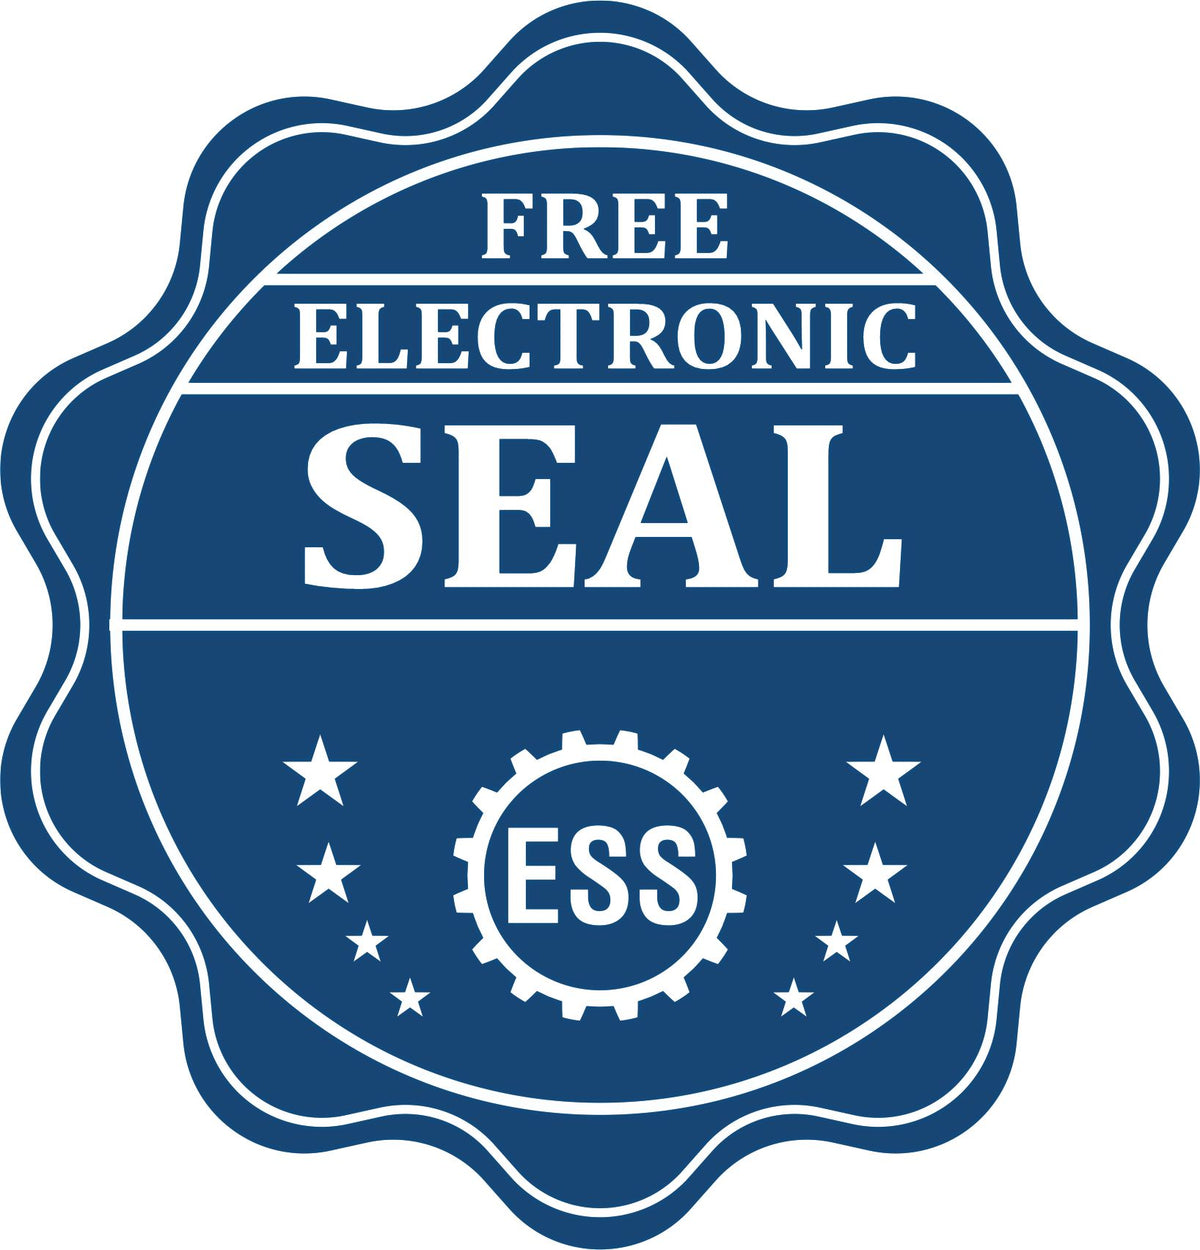 A badge showing a free electronic seal for the Premium MaxLight Pre-Inked Utah Geology Stamp with stars and the ESS gear on the emblem.